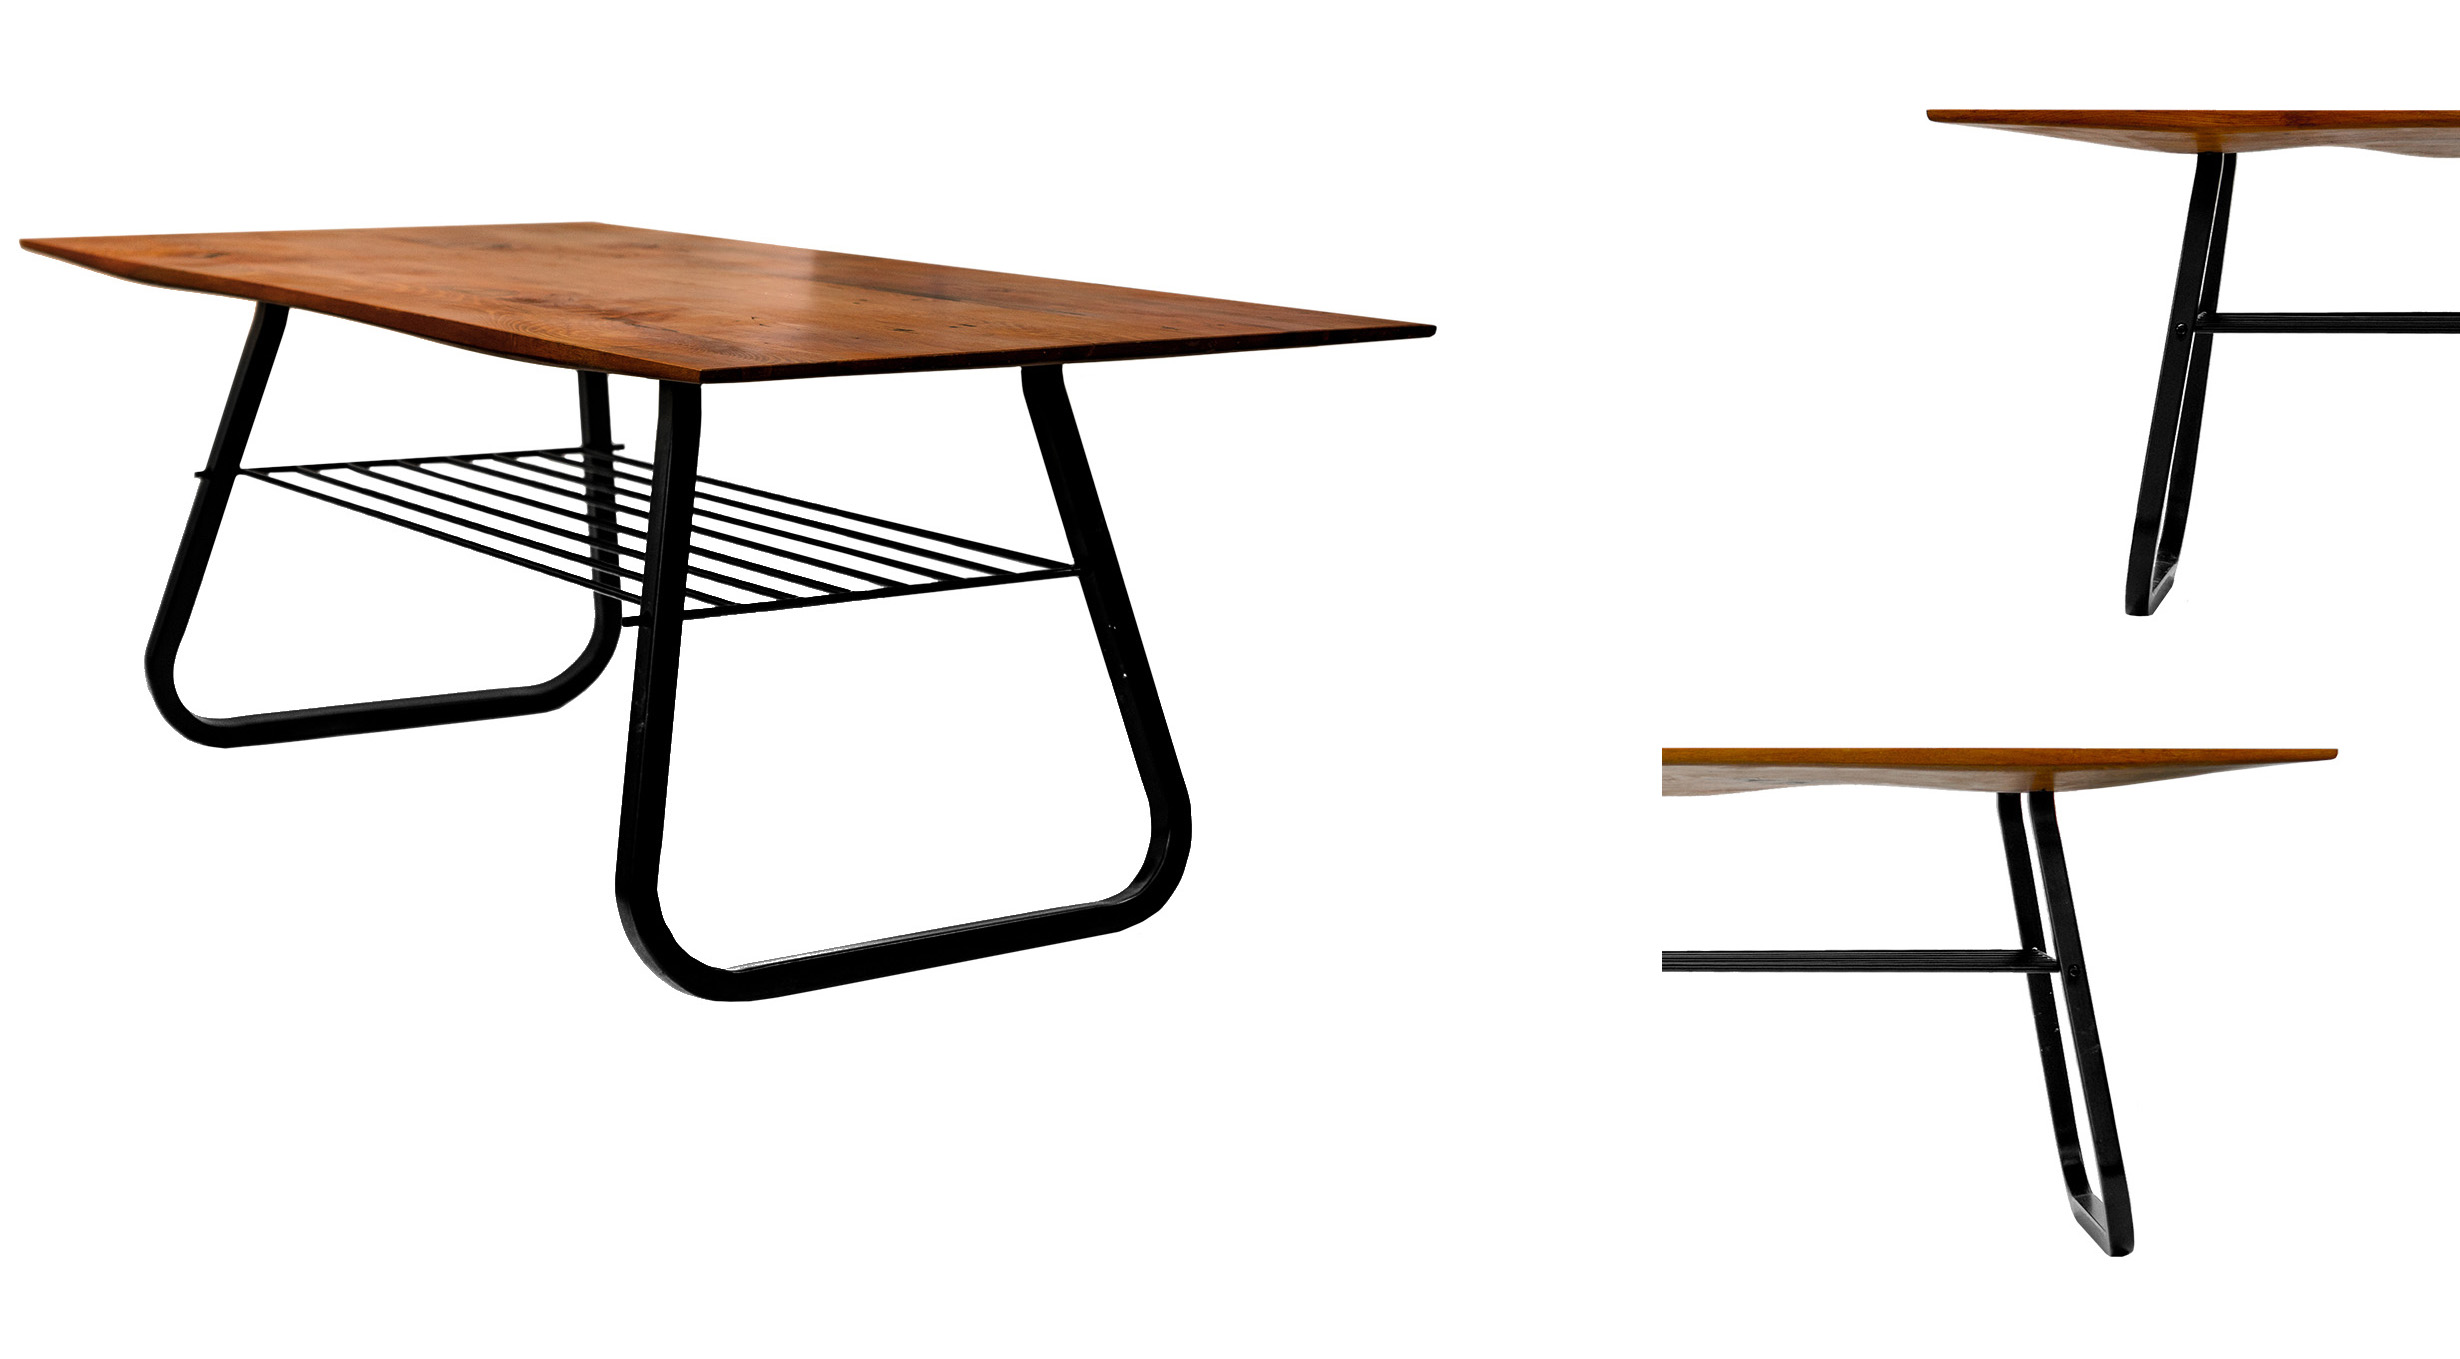  Vessel: a pair of tables for Waiheke; recyled Rimu and steel 